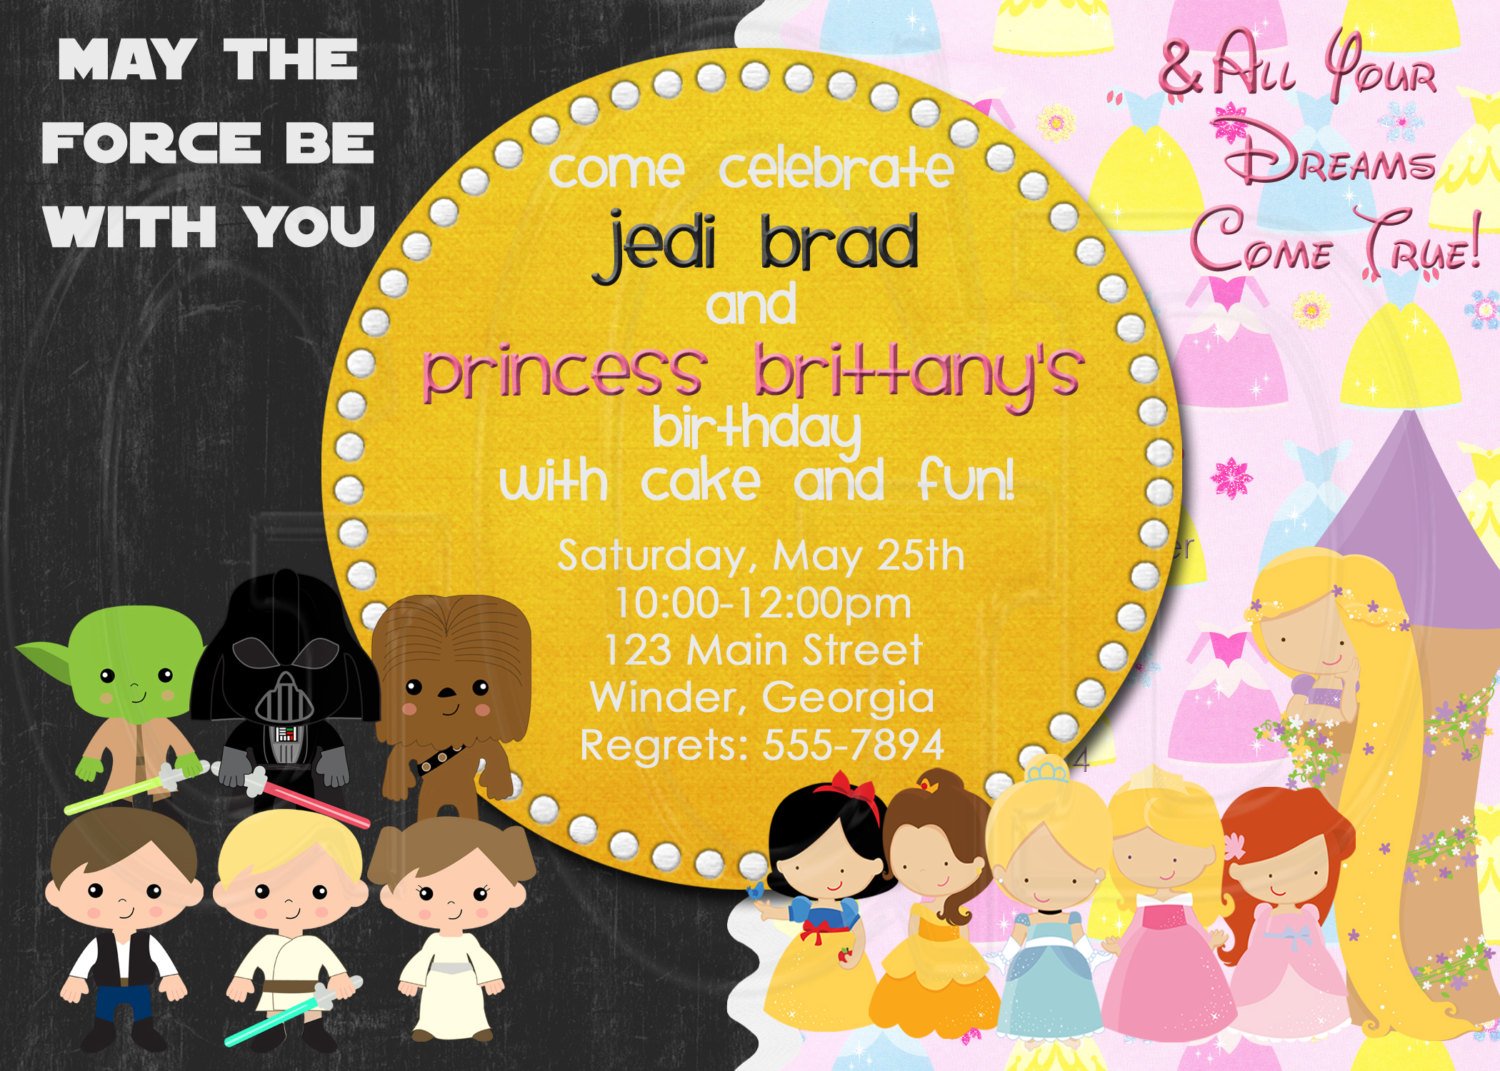 Star Wars and Princess Joint Birthday Party Invitations